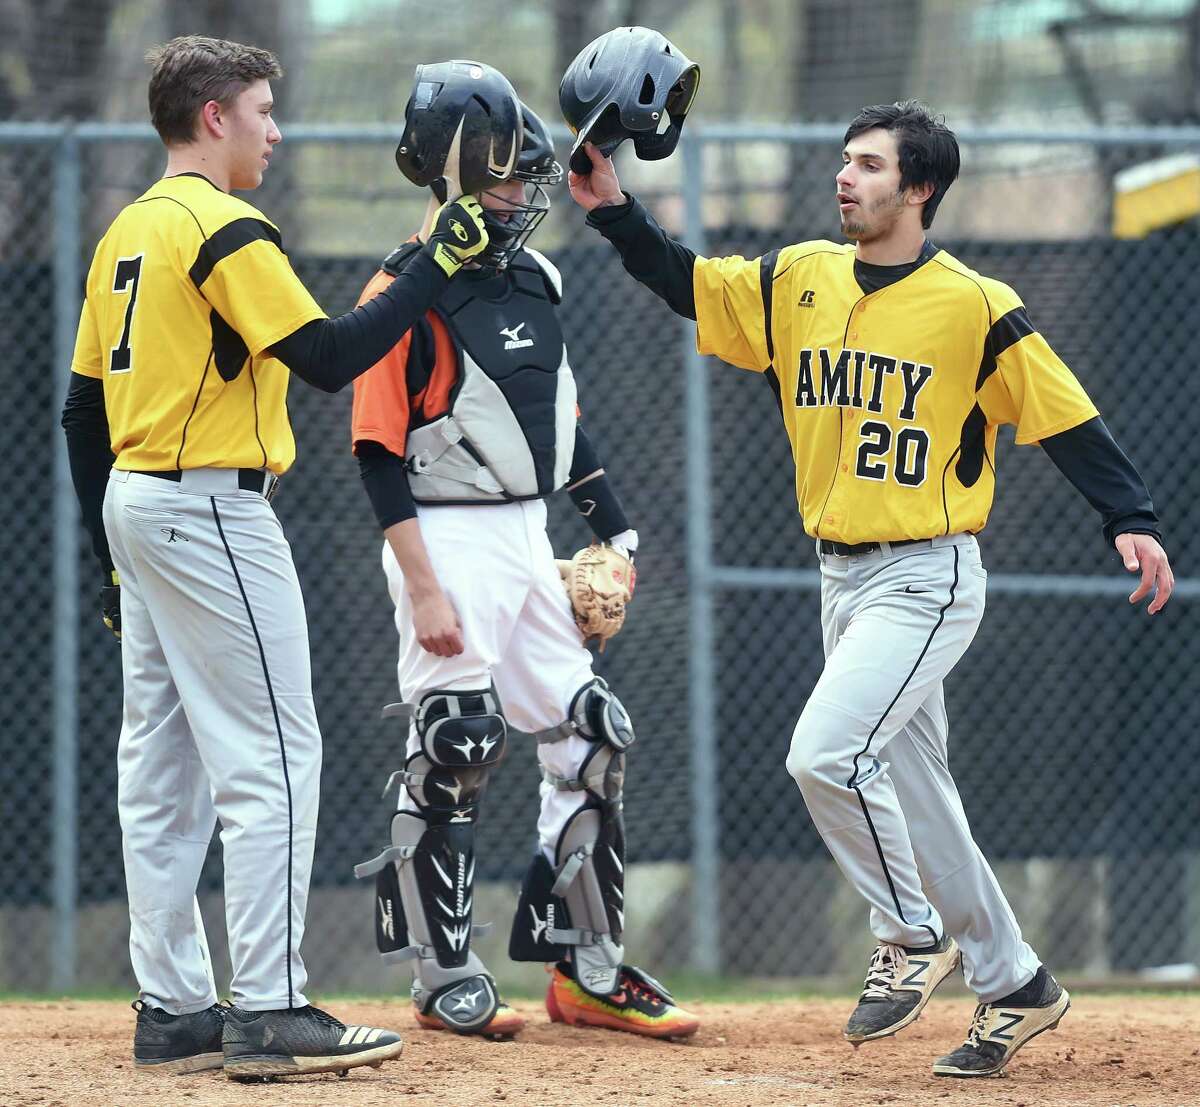 John Lumpinski (left) of Amity congratulates Jared Smith after his first of two home runs against Shelton in Woodbridge on April 30, 2018.